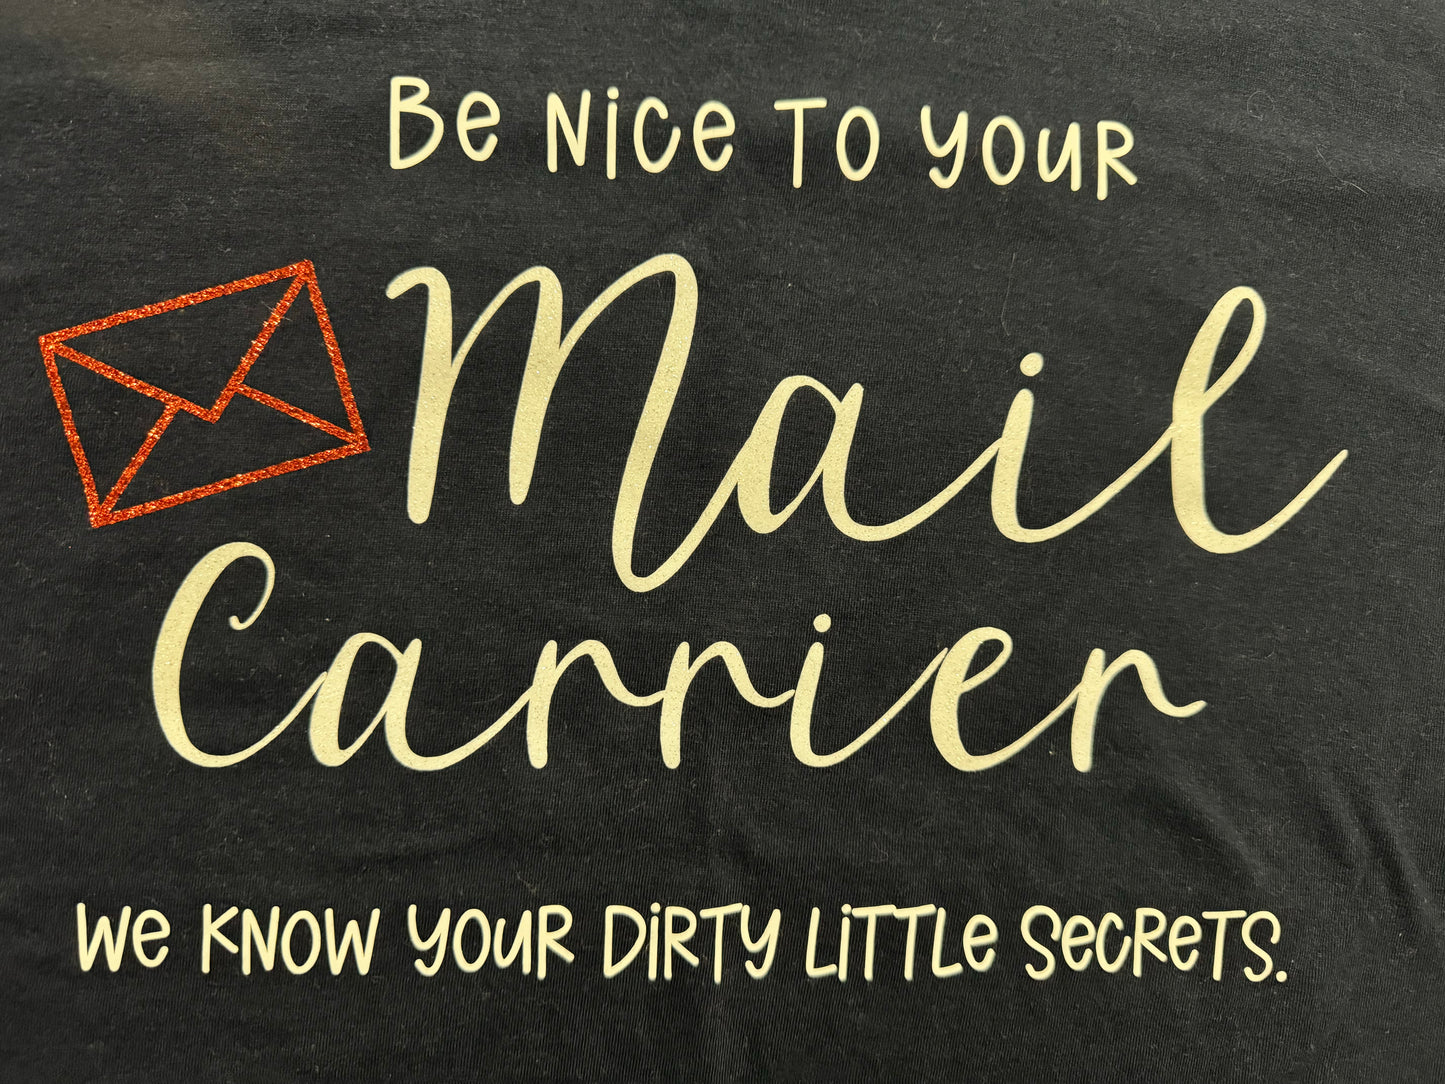 Be Nice To Your Mail Carrier T-Shirt